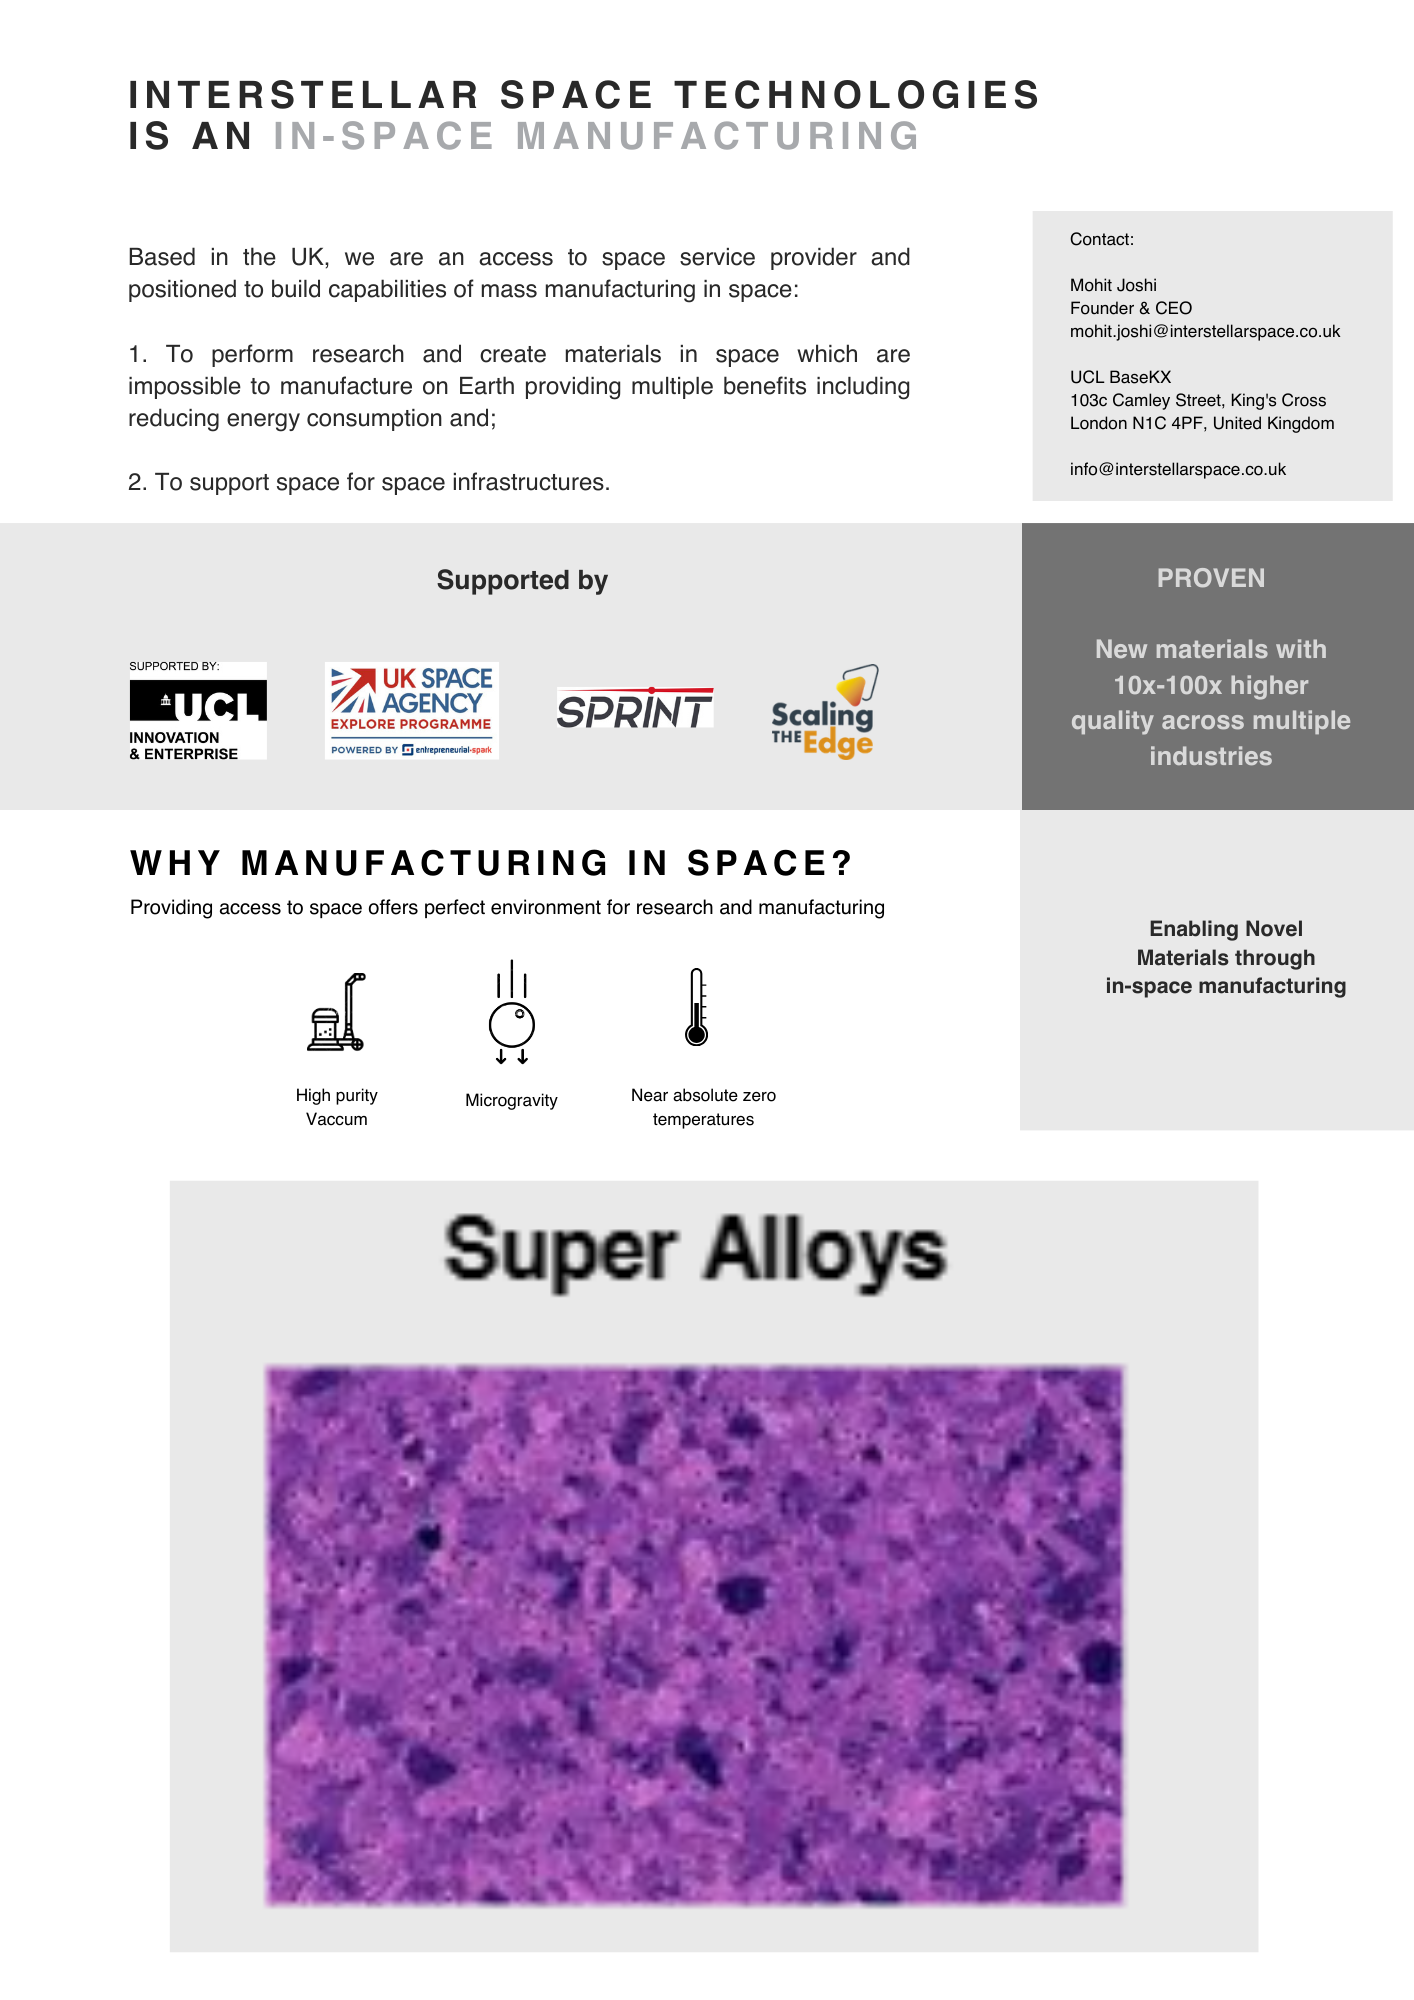 In-space microgravity manufacturing of High Temperature Super Alloys